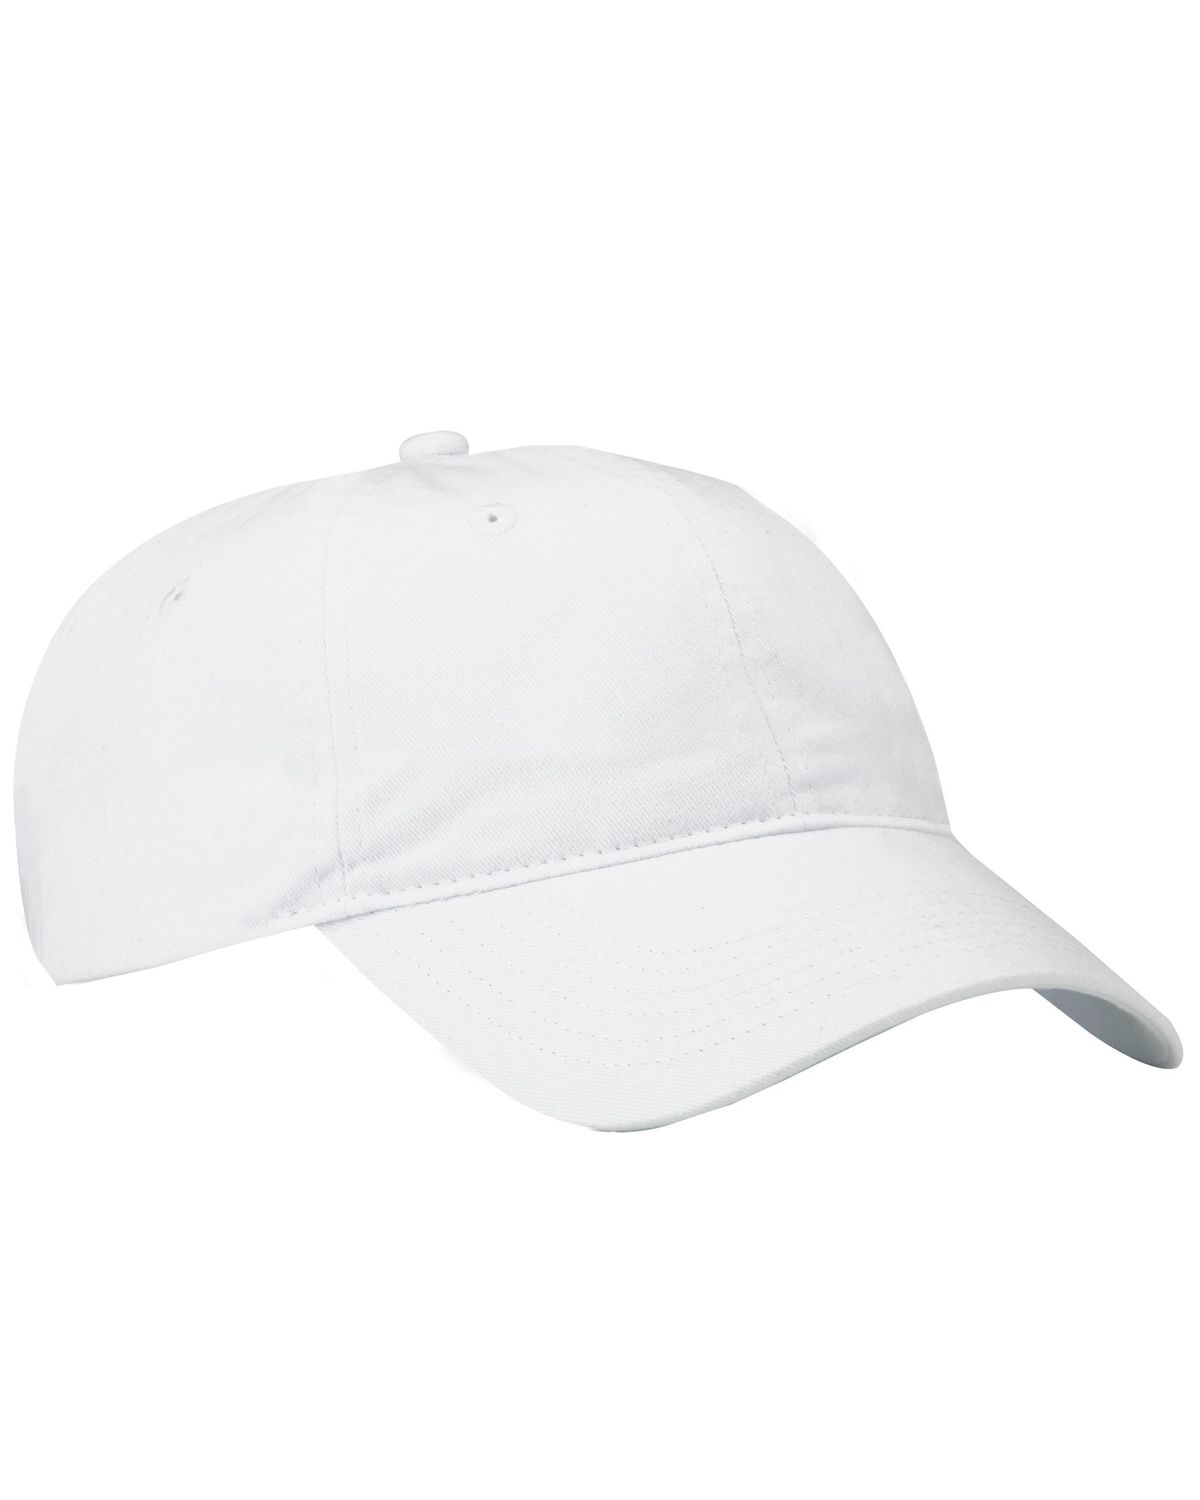 'Port & Company CP77 Adult Brushed Twill Low Profile Cap'